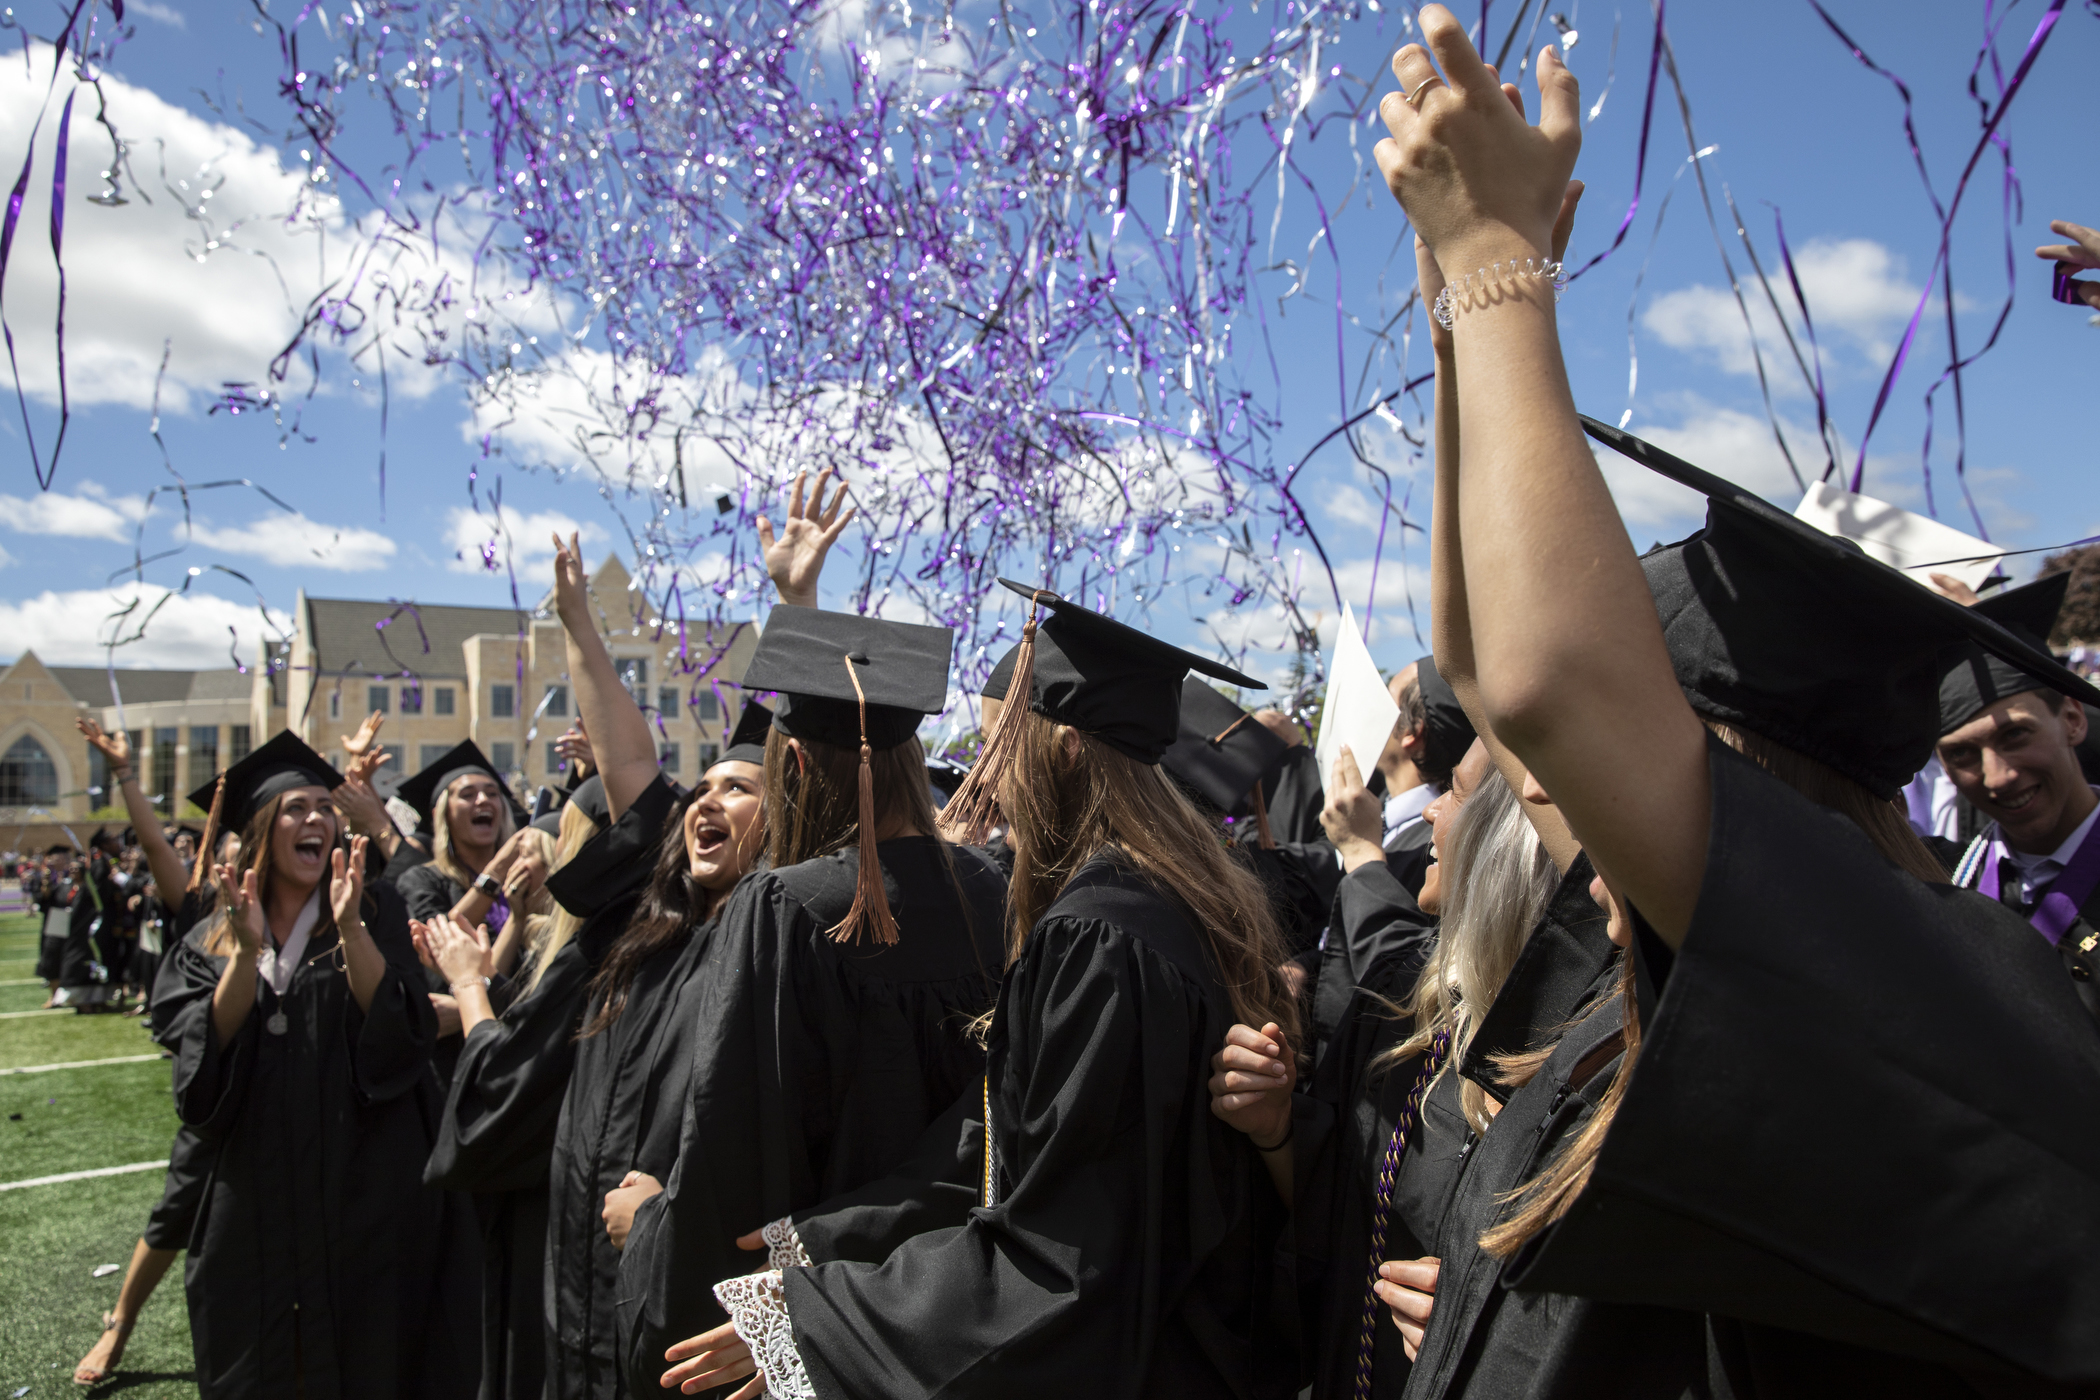 Class of 2019 graduates celebrate on May 25 as confetti launches during the undergraduate commencement ceremony.